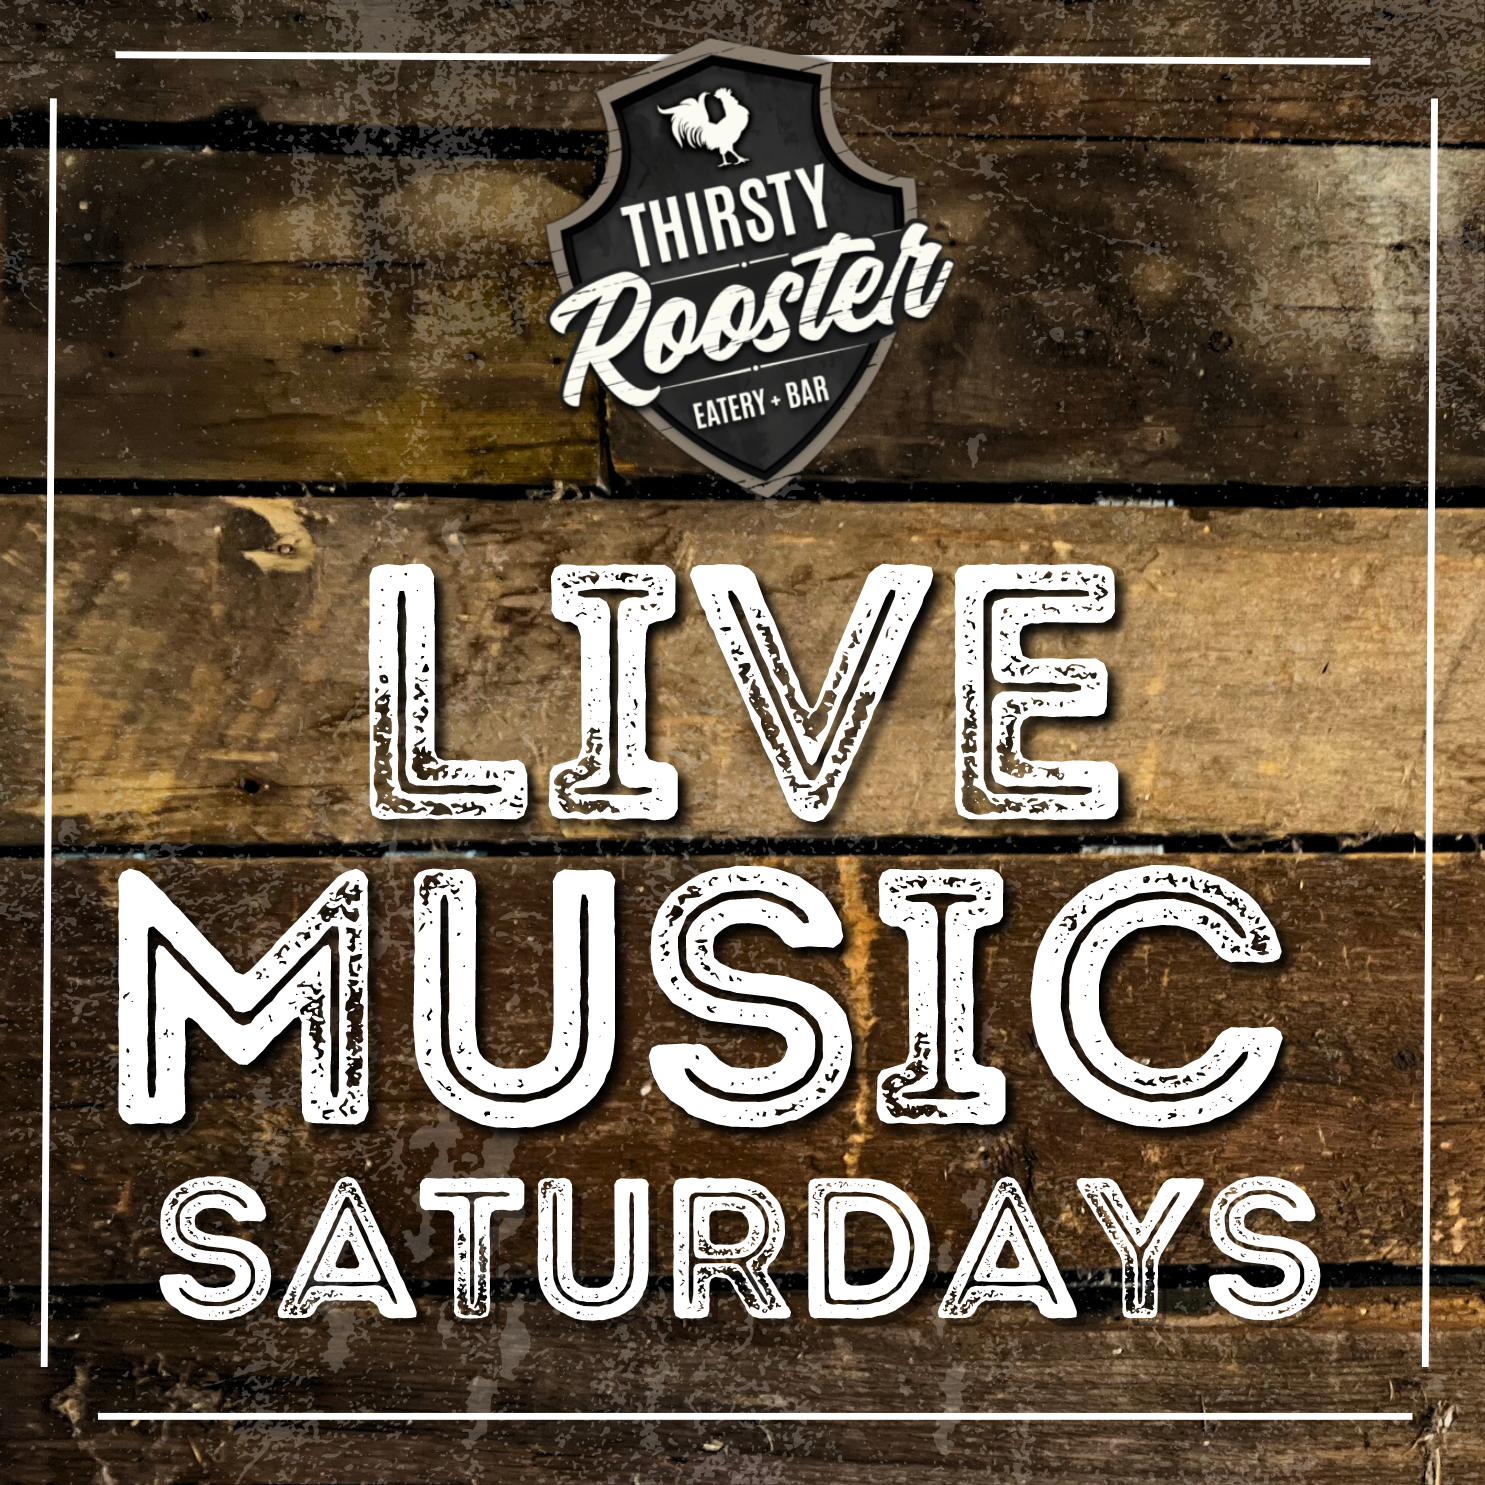 Live Music St. Albert – On (most) Saturdays in St. Albert we showcase the best in local talent. Come check it out! 780-777-8632